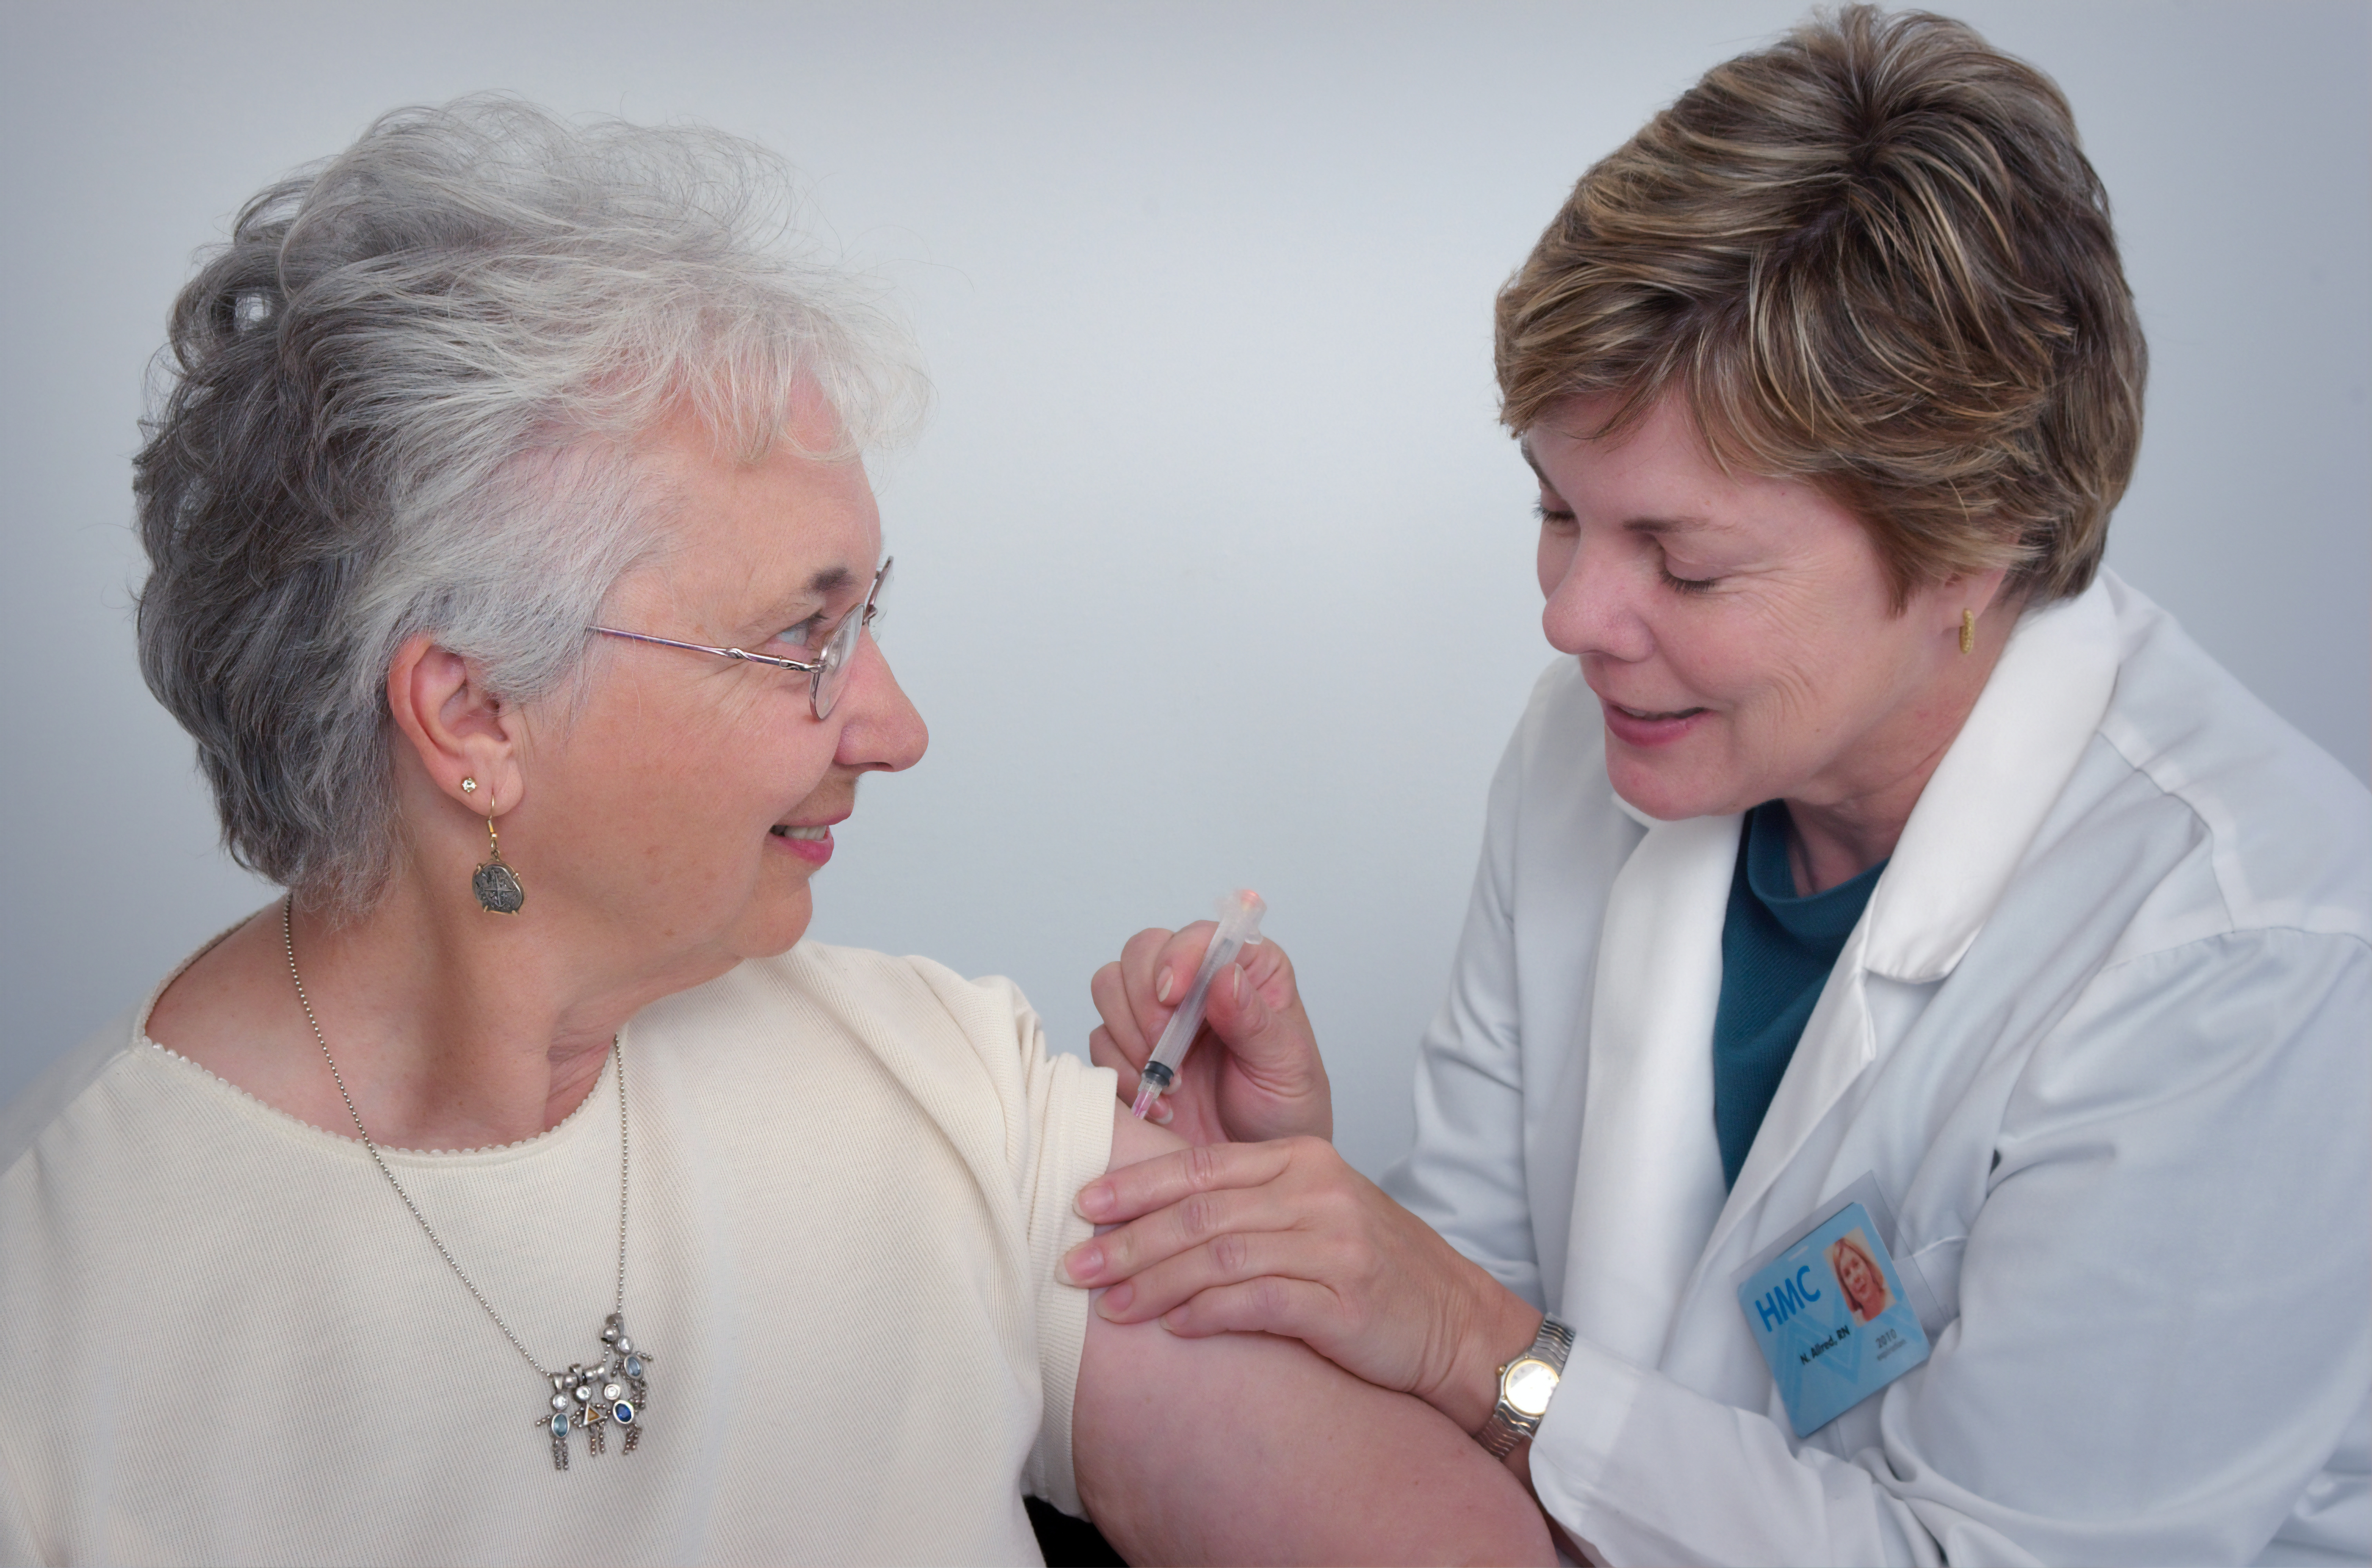 An image of a healthcare worker administering an injection to a patient.